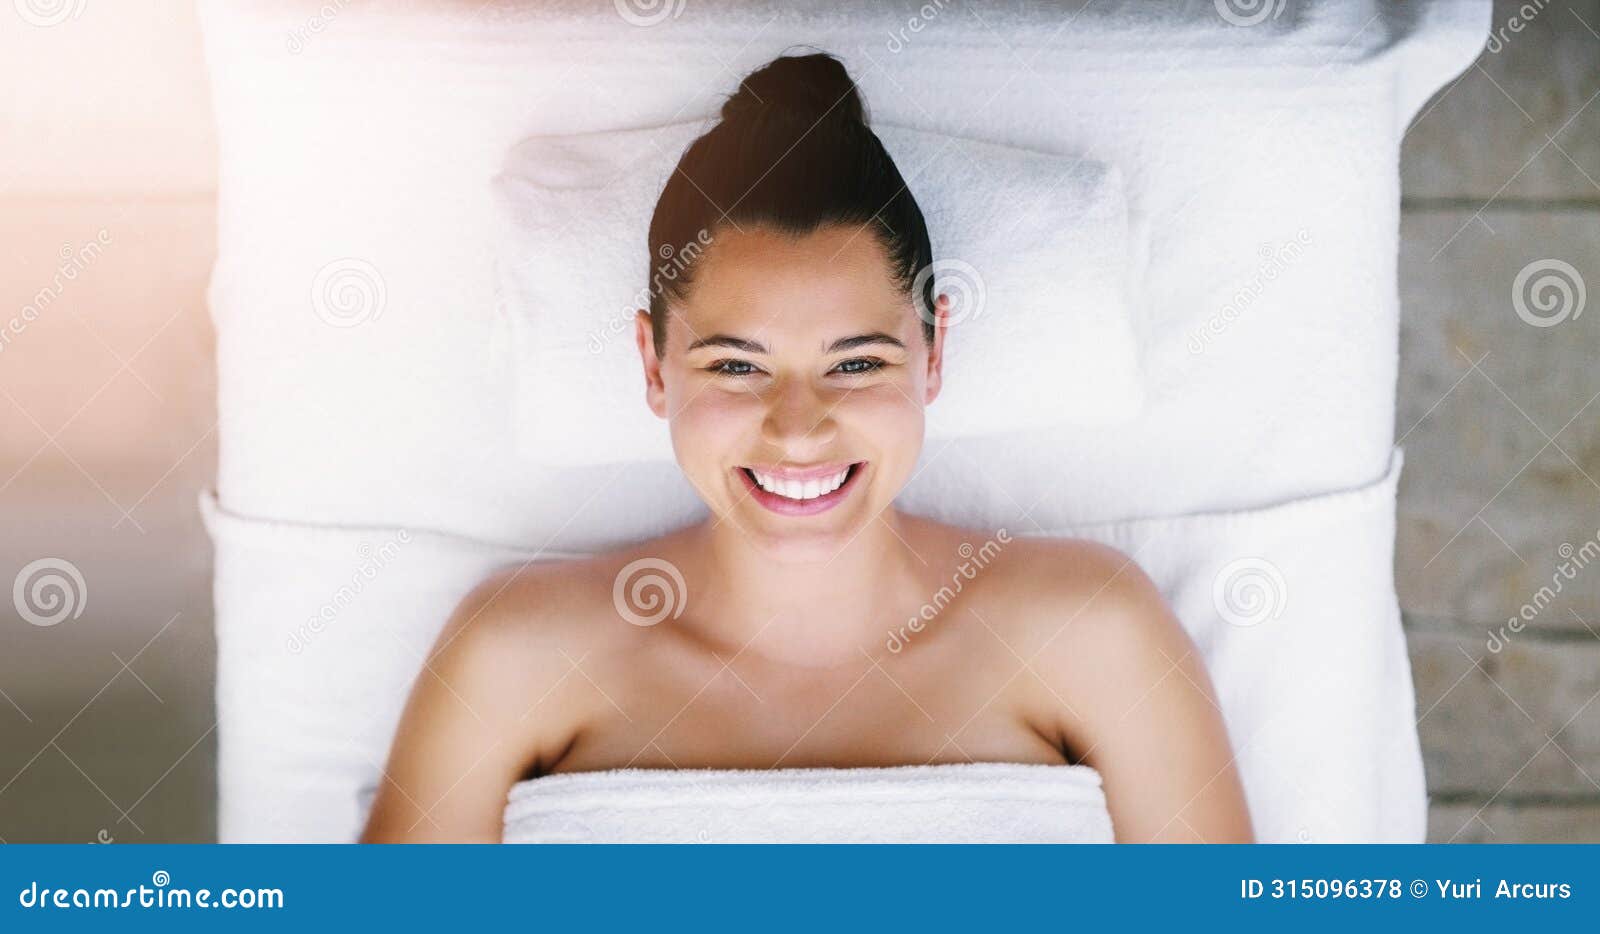 spa, salon and portrait of woman with smile for massage, facial treatment and luxury pamper. beauty aesthetic, happy and